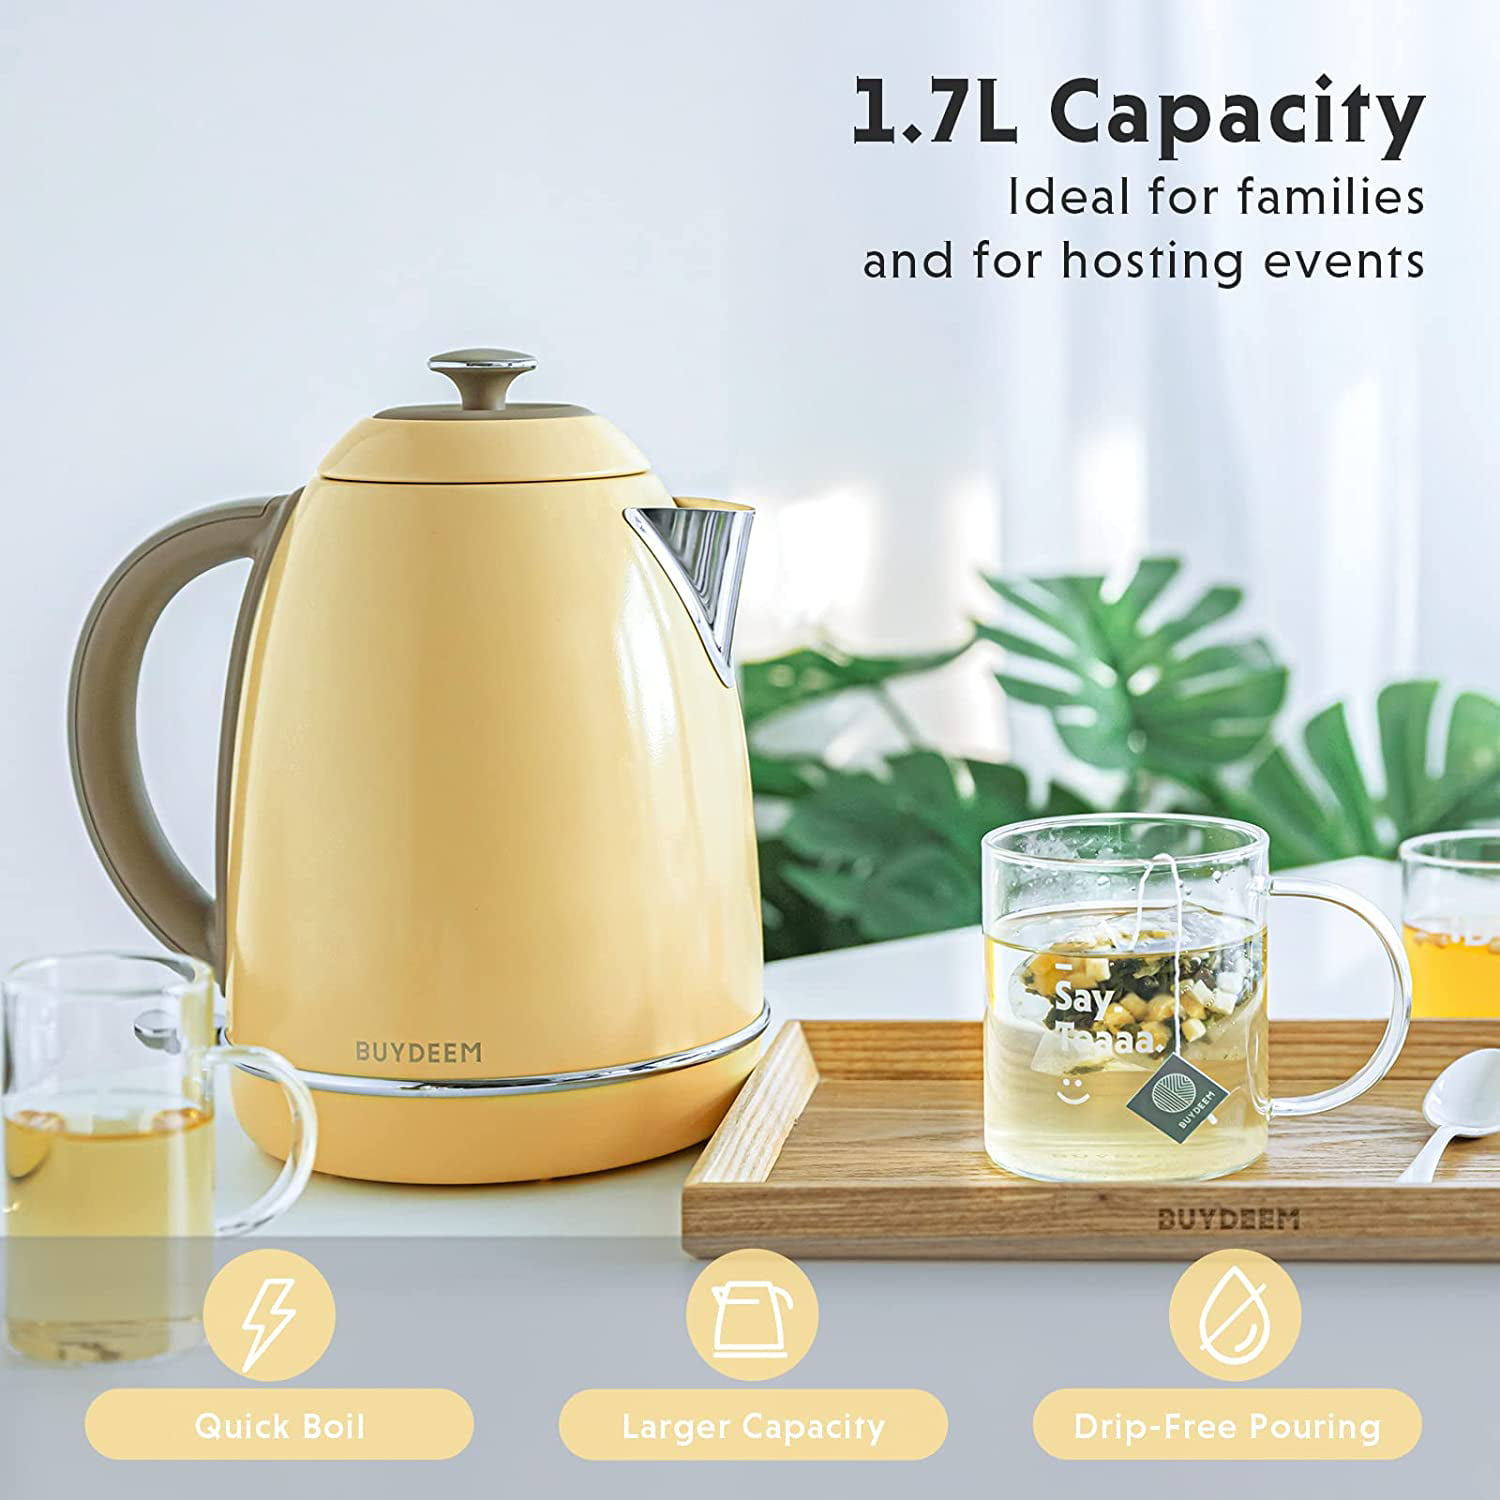 BUYDEEM K640N Stainless Steel Electric Tea Kettle with Auto Shut-Off and  Boil Dry Protection, 1.7 Liter Cordless Hot Water Boiler with Swivel Base